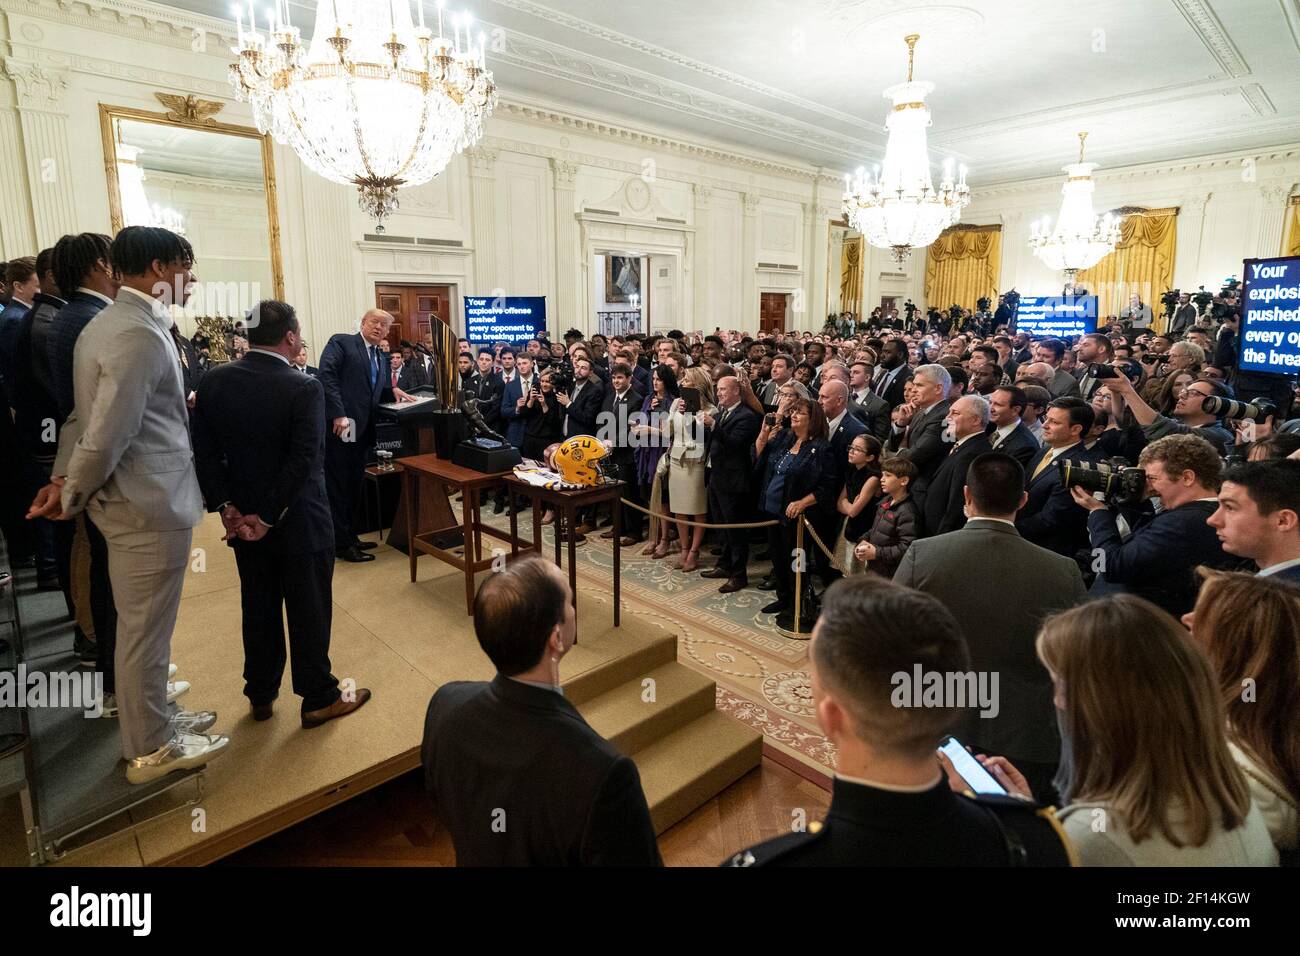 President Donald Trump celebrates the 2019 College Football National Champions the Louisiana State University LSU Tigers Friday Jan. 17 2020 in the East Room of the White House. Stock Photo